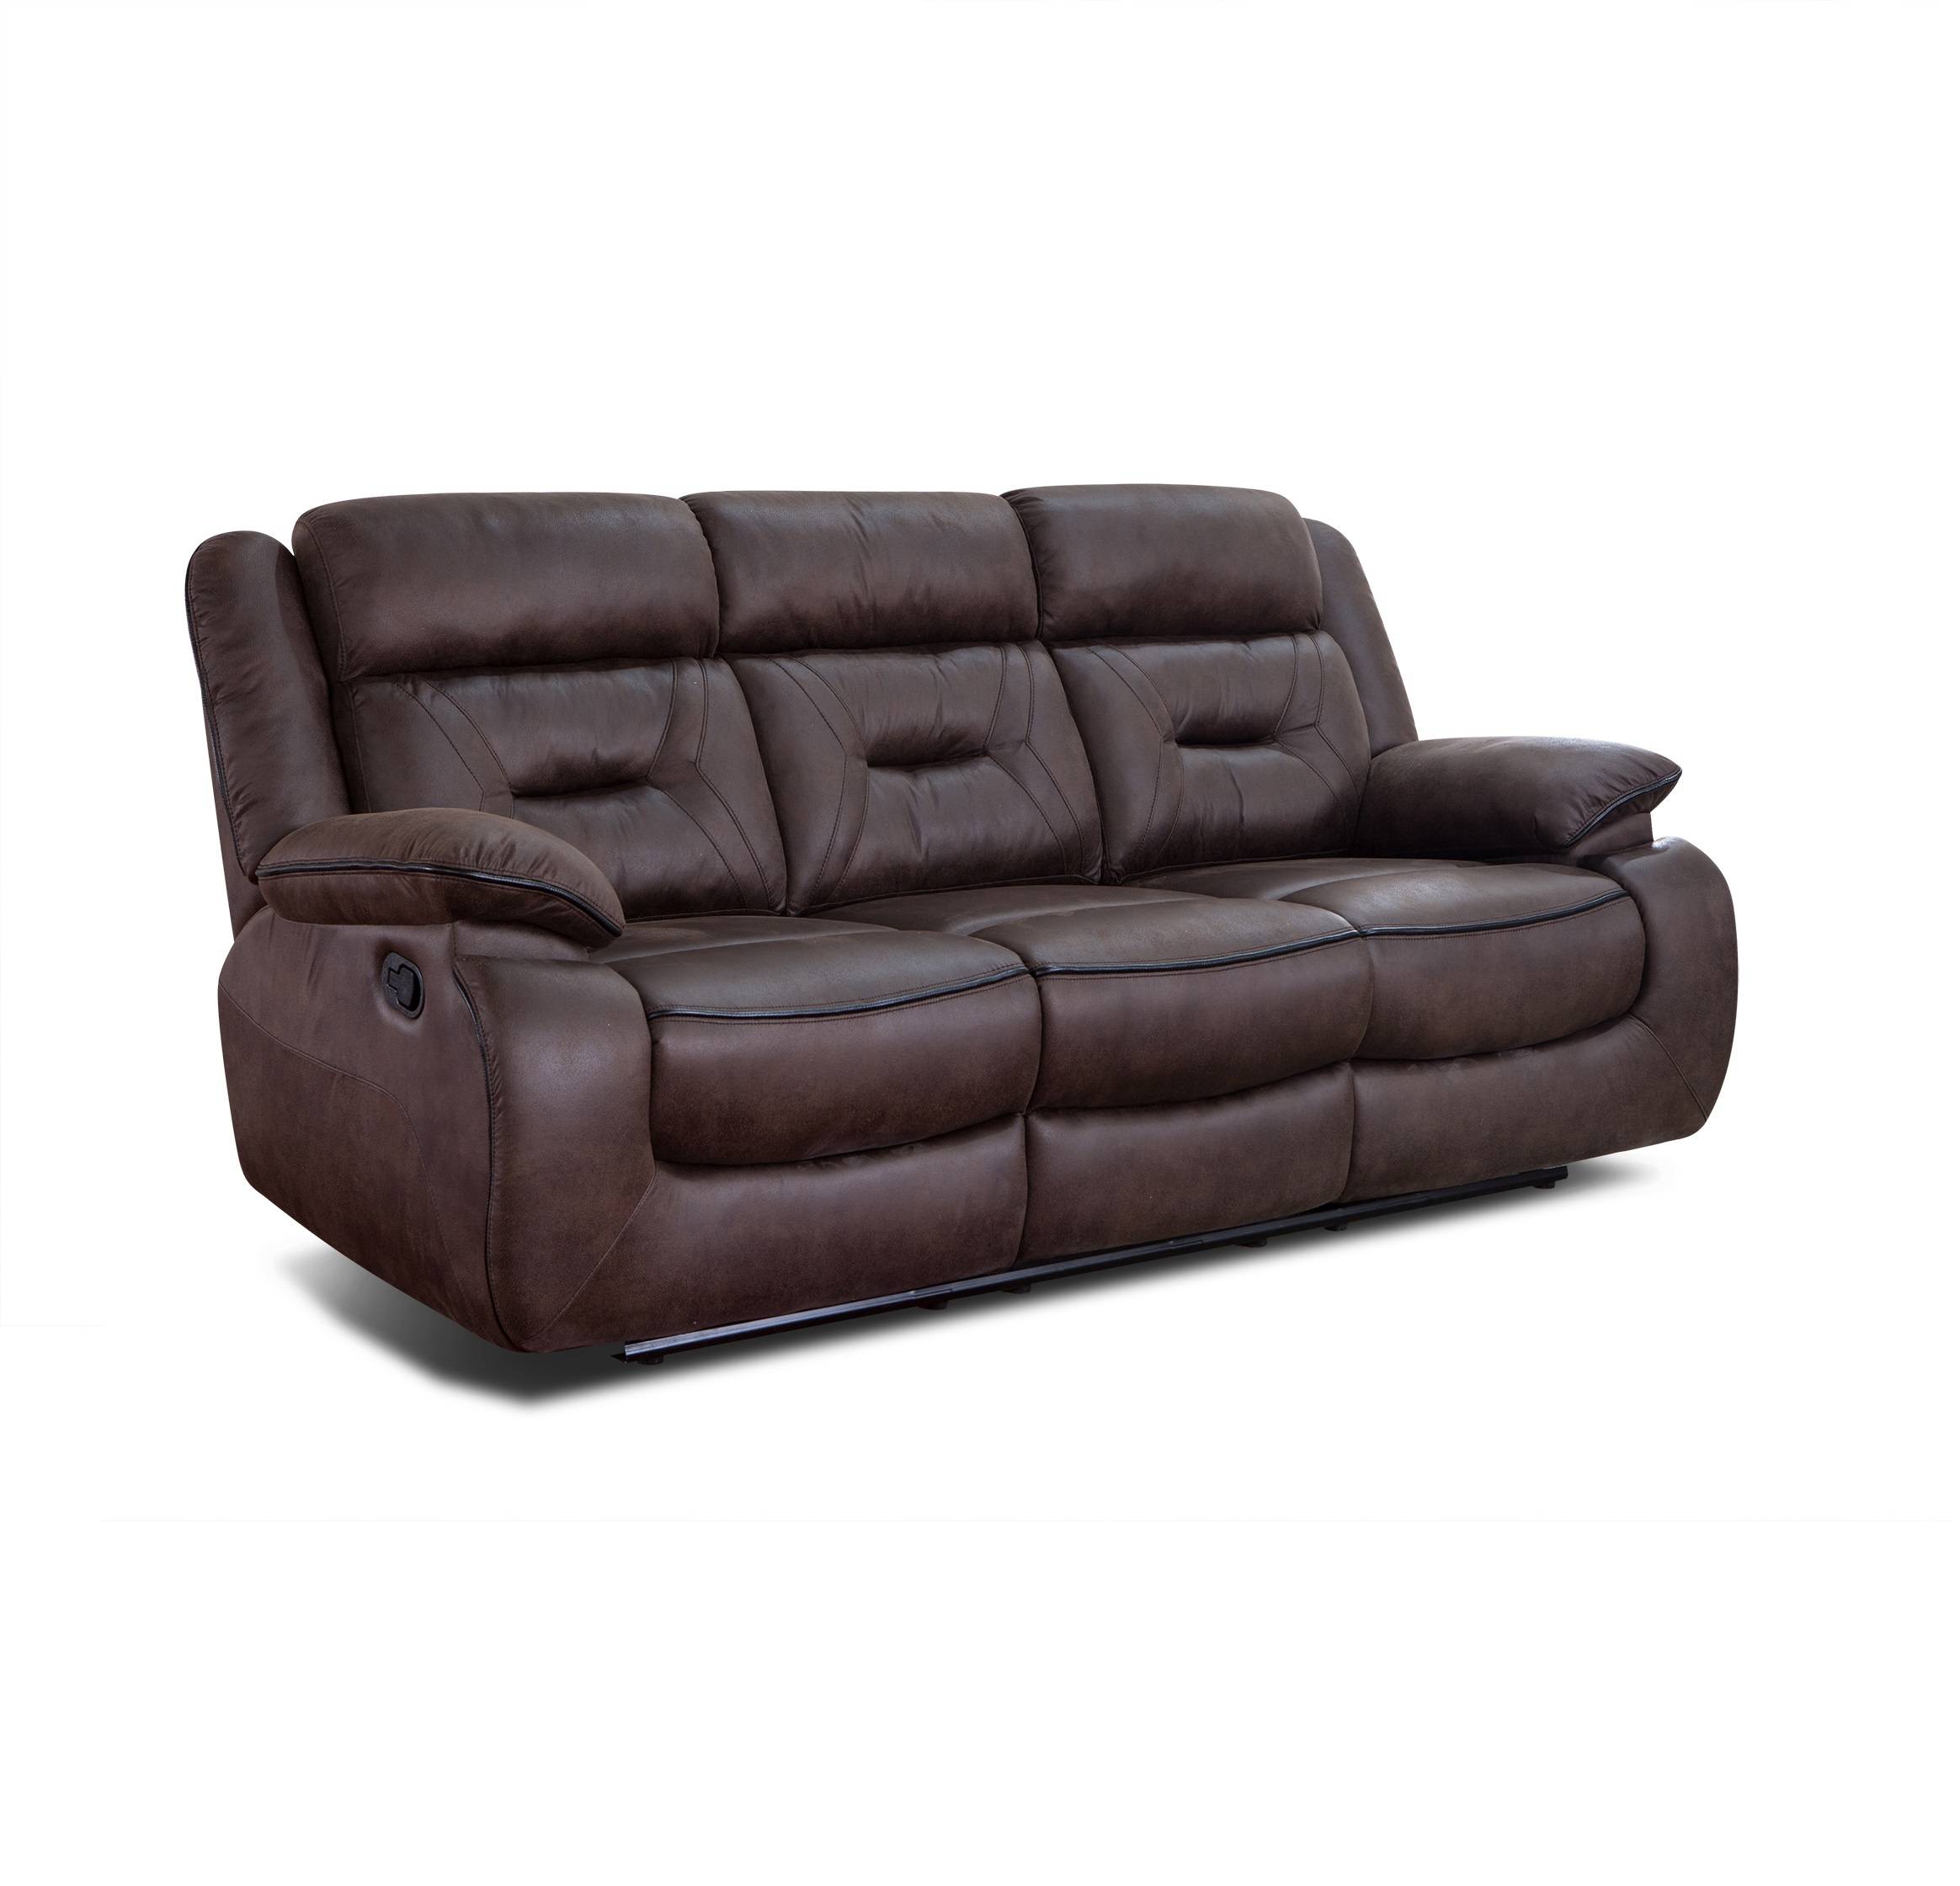 Popular Design for Electric Recliner Sofa - Home cinema leather recliner relax 3 seater sofa electric – Chuan Yang detail pictures